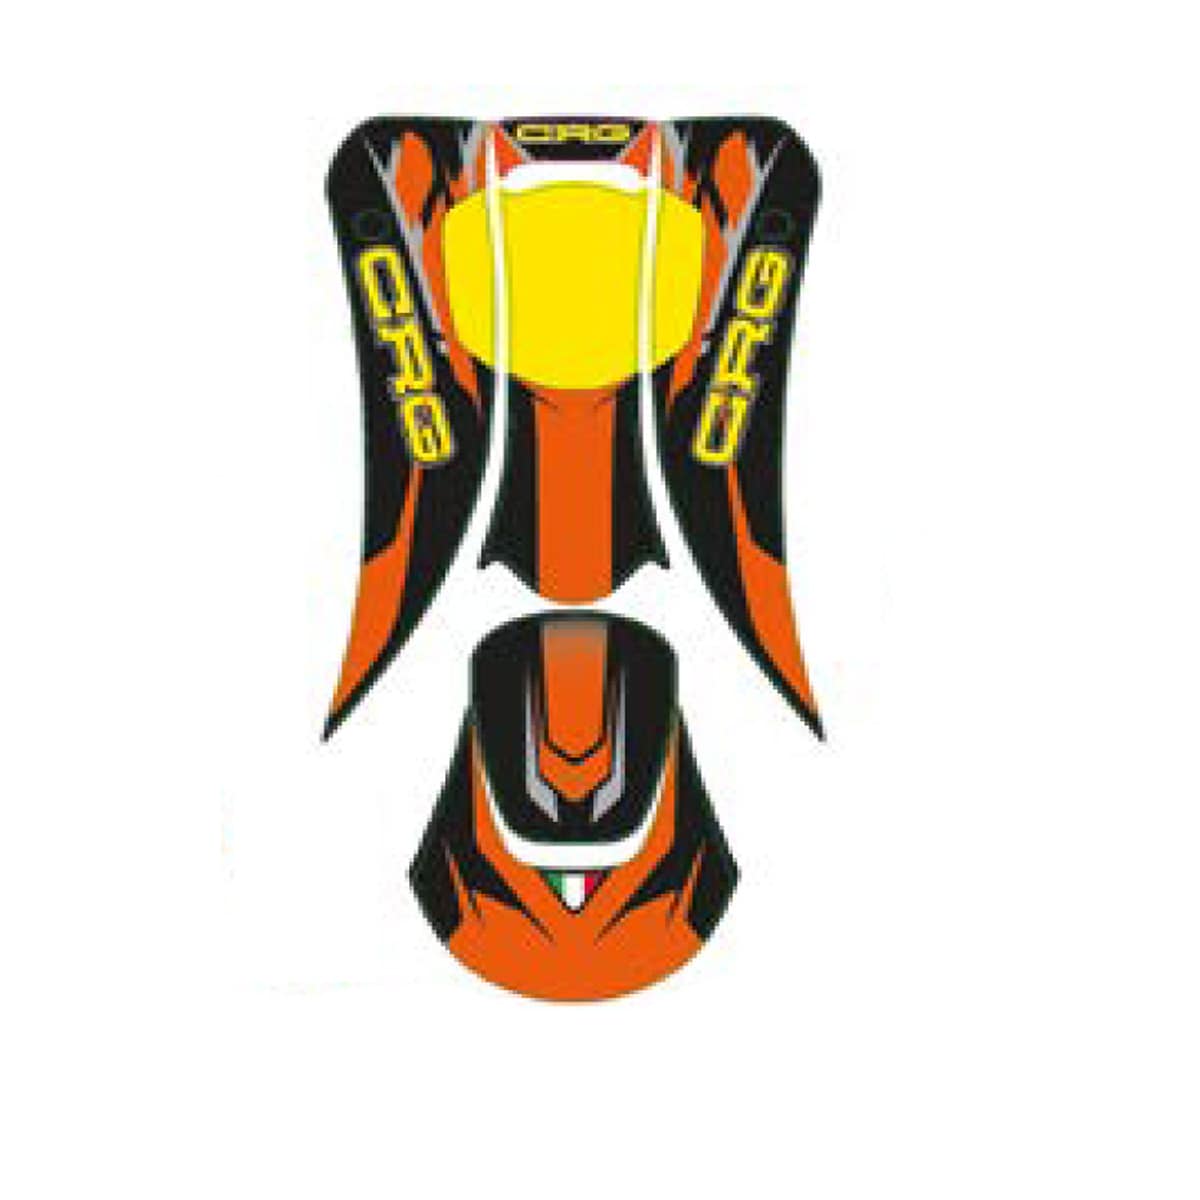 Decal kit Front Panel CRG 508